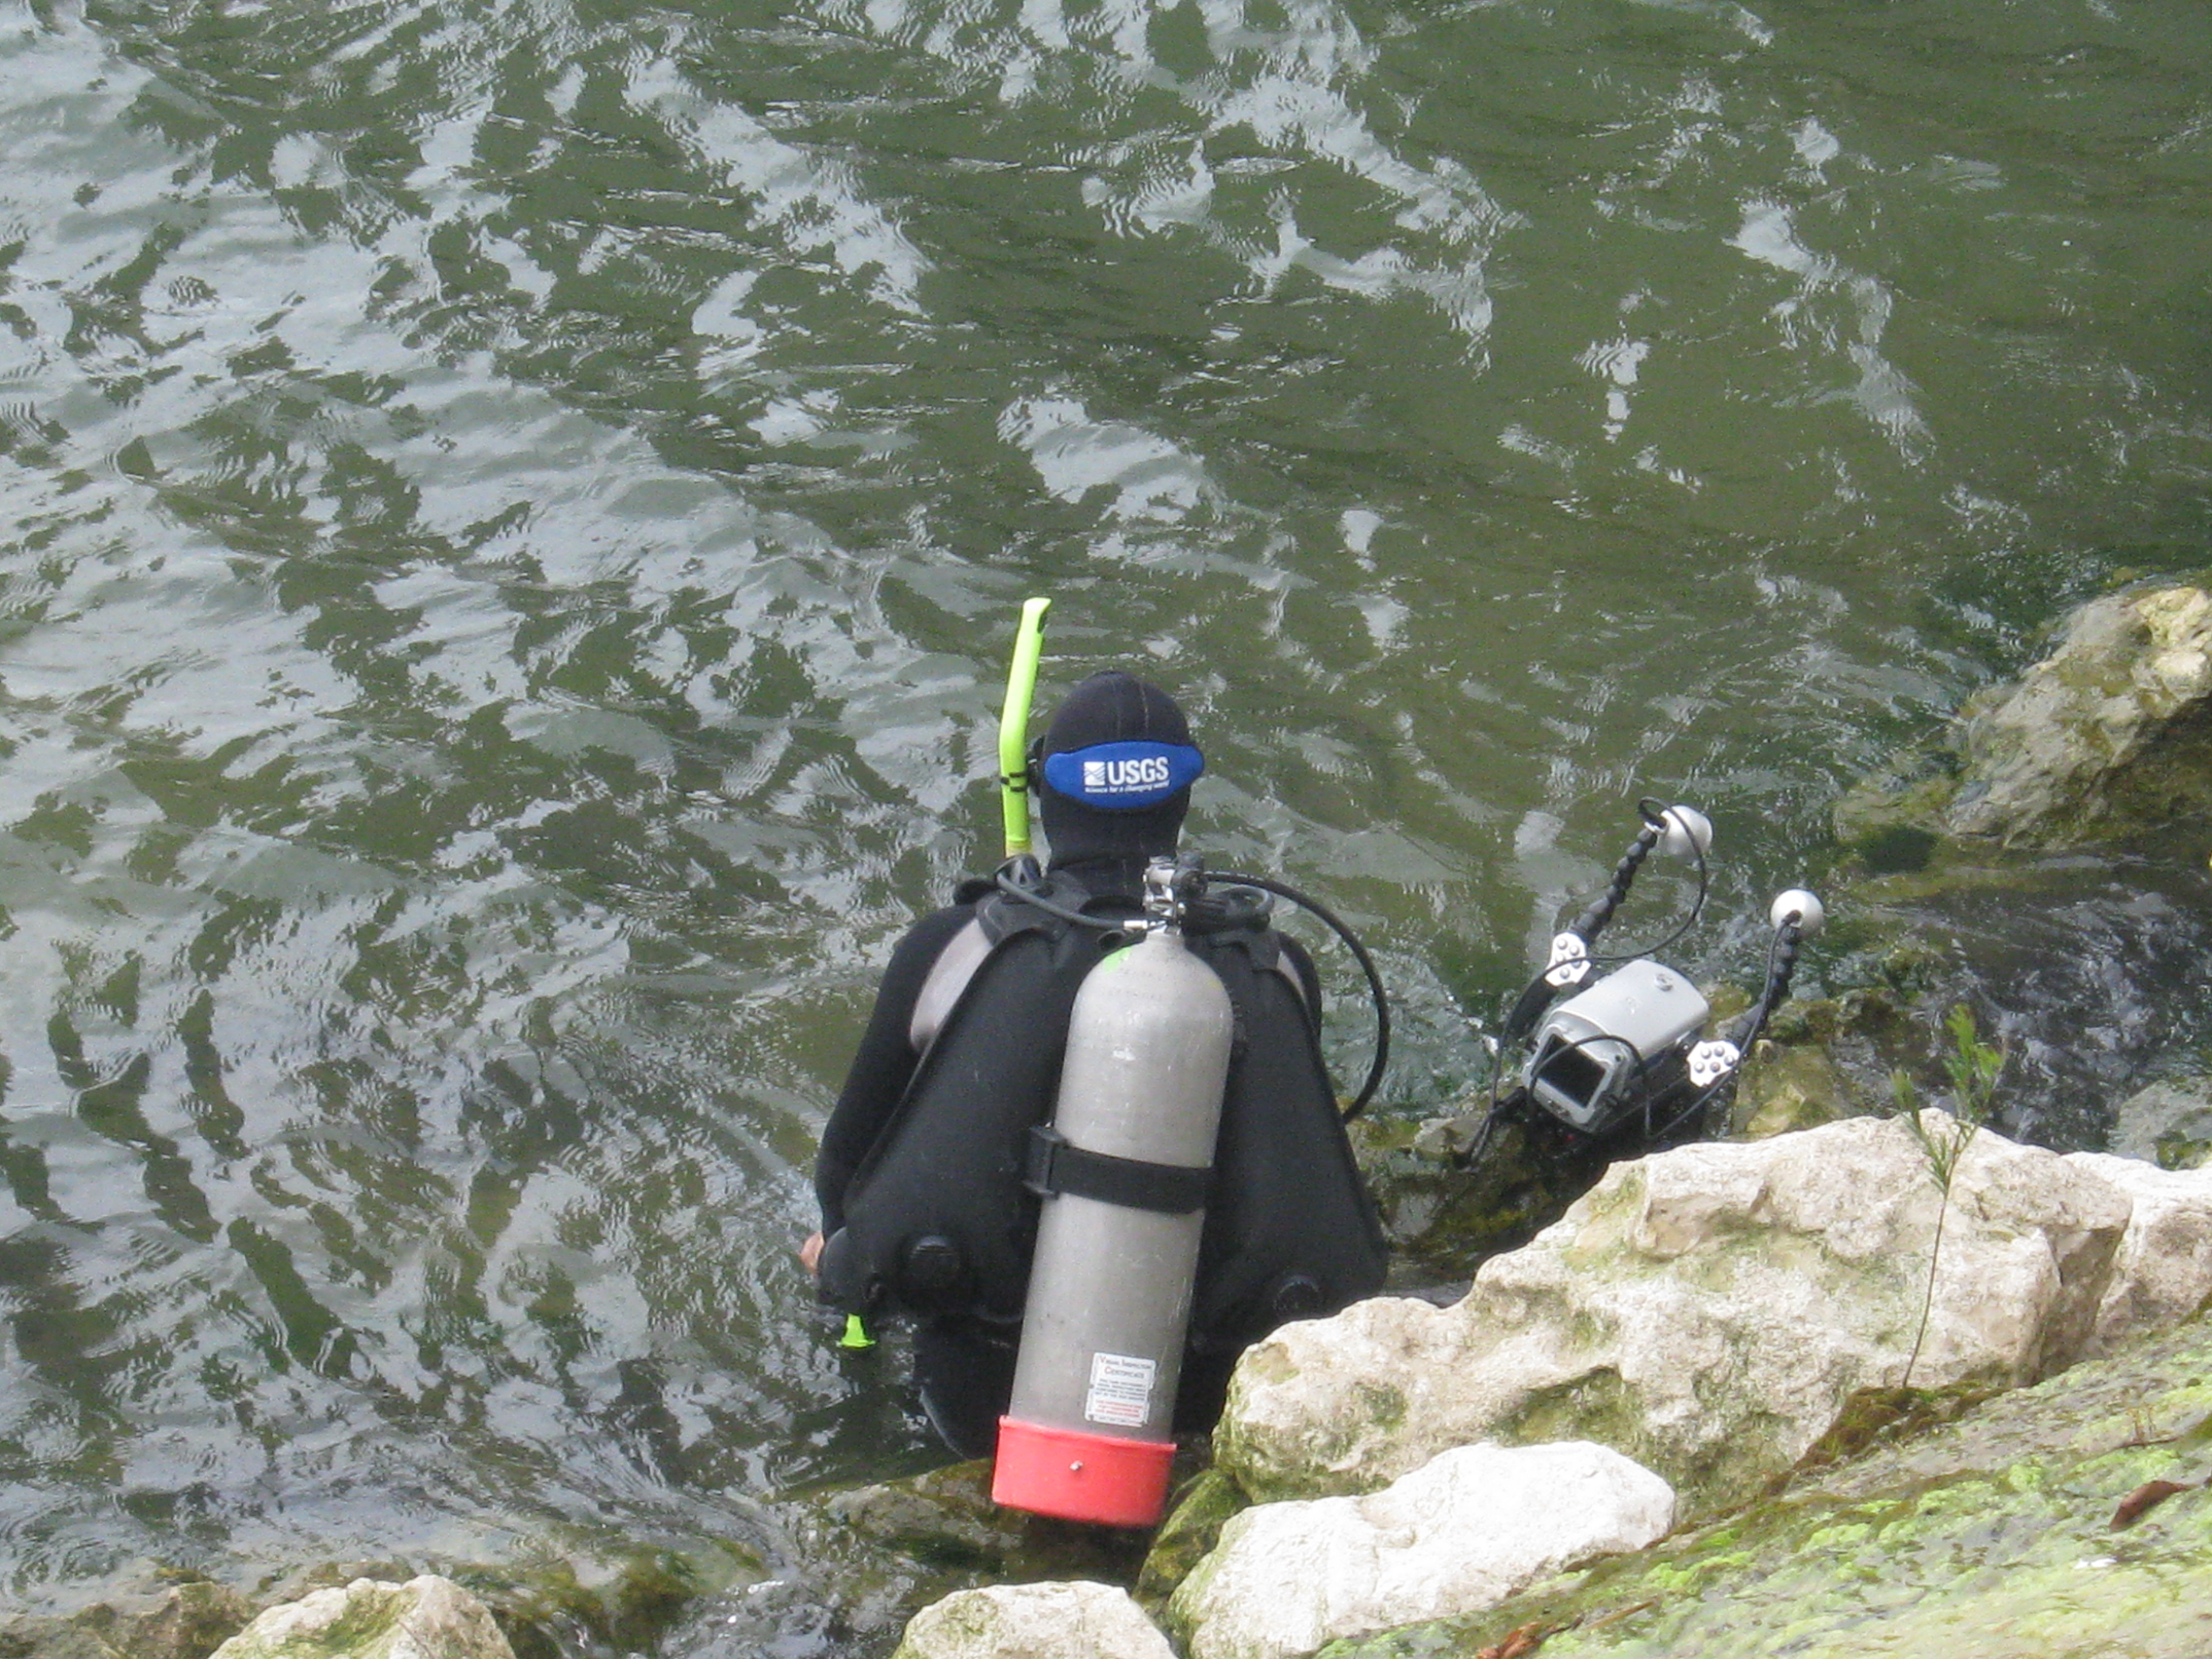 Scuba diver at a rocky shoreline entering the water, holding an underwater camera